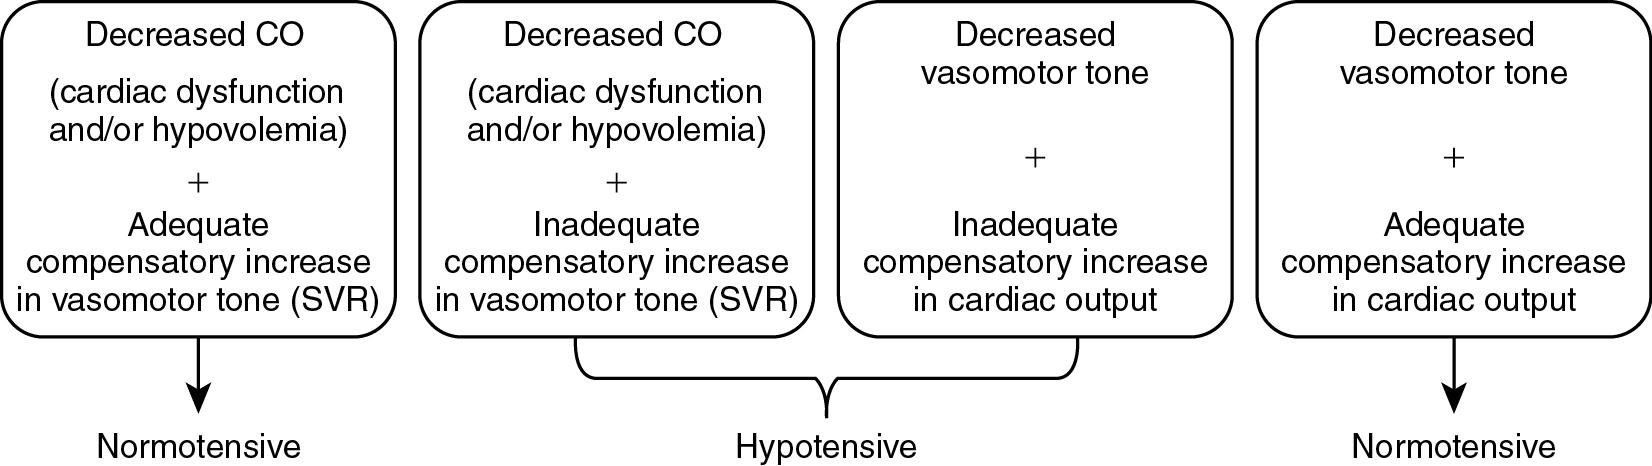 Fig. 15.5, Pathophysiology of neonatal cardiovascular compromise in primary myocardial dysfunction and primary abnormal vascular tone regulation with or without compensation by the unaffected other variable. This figure illustrates why blood pressure can remain in the “normal” range when there is appropriate compensatory increase in either vasomotor tone or cardiac output. In the hypotensive scenarios, there is inadequate compensatory increase in these variables. CO , Cardiac output.